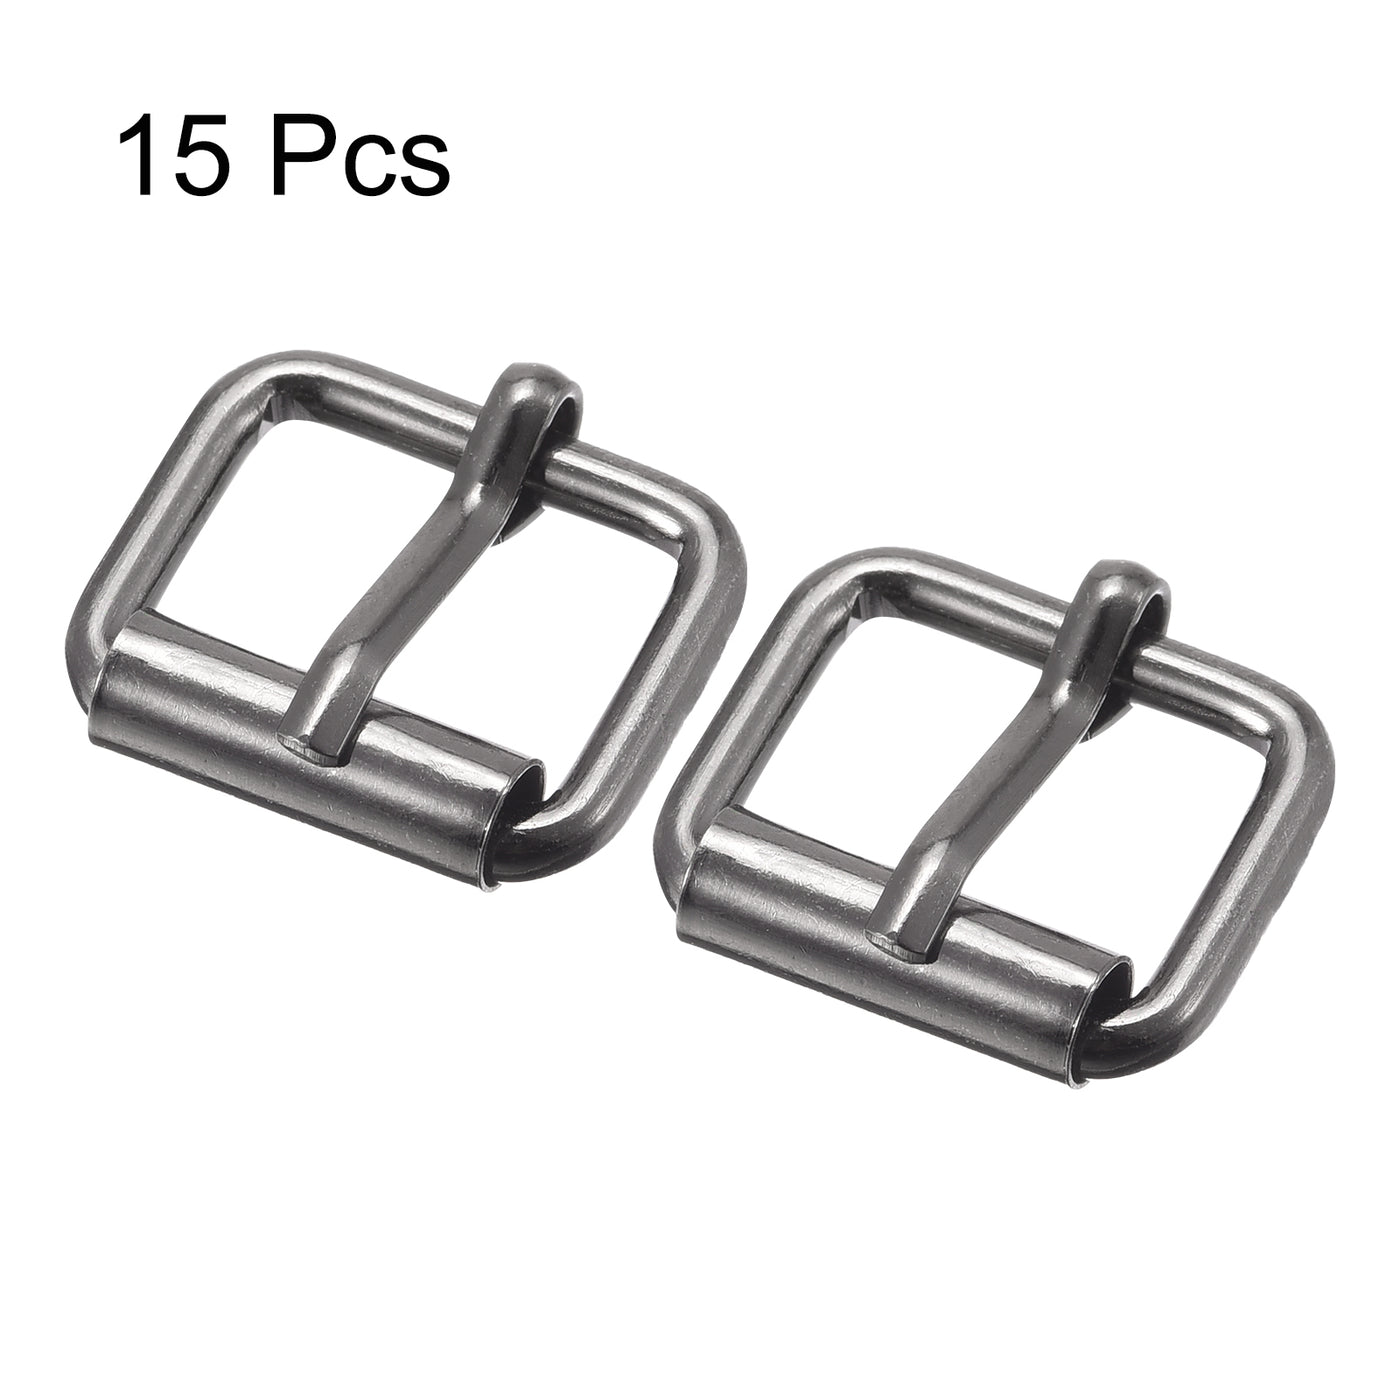 uxcell Uxcell 17mm(0.67") Metal Roller Buckles for Belts Bags Straps DIY Dark Gray 15pcs